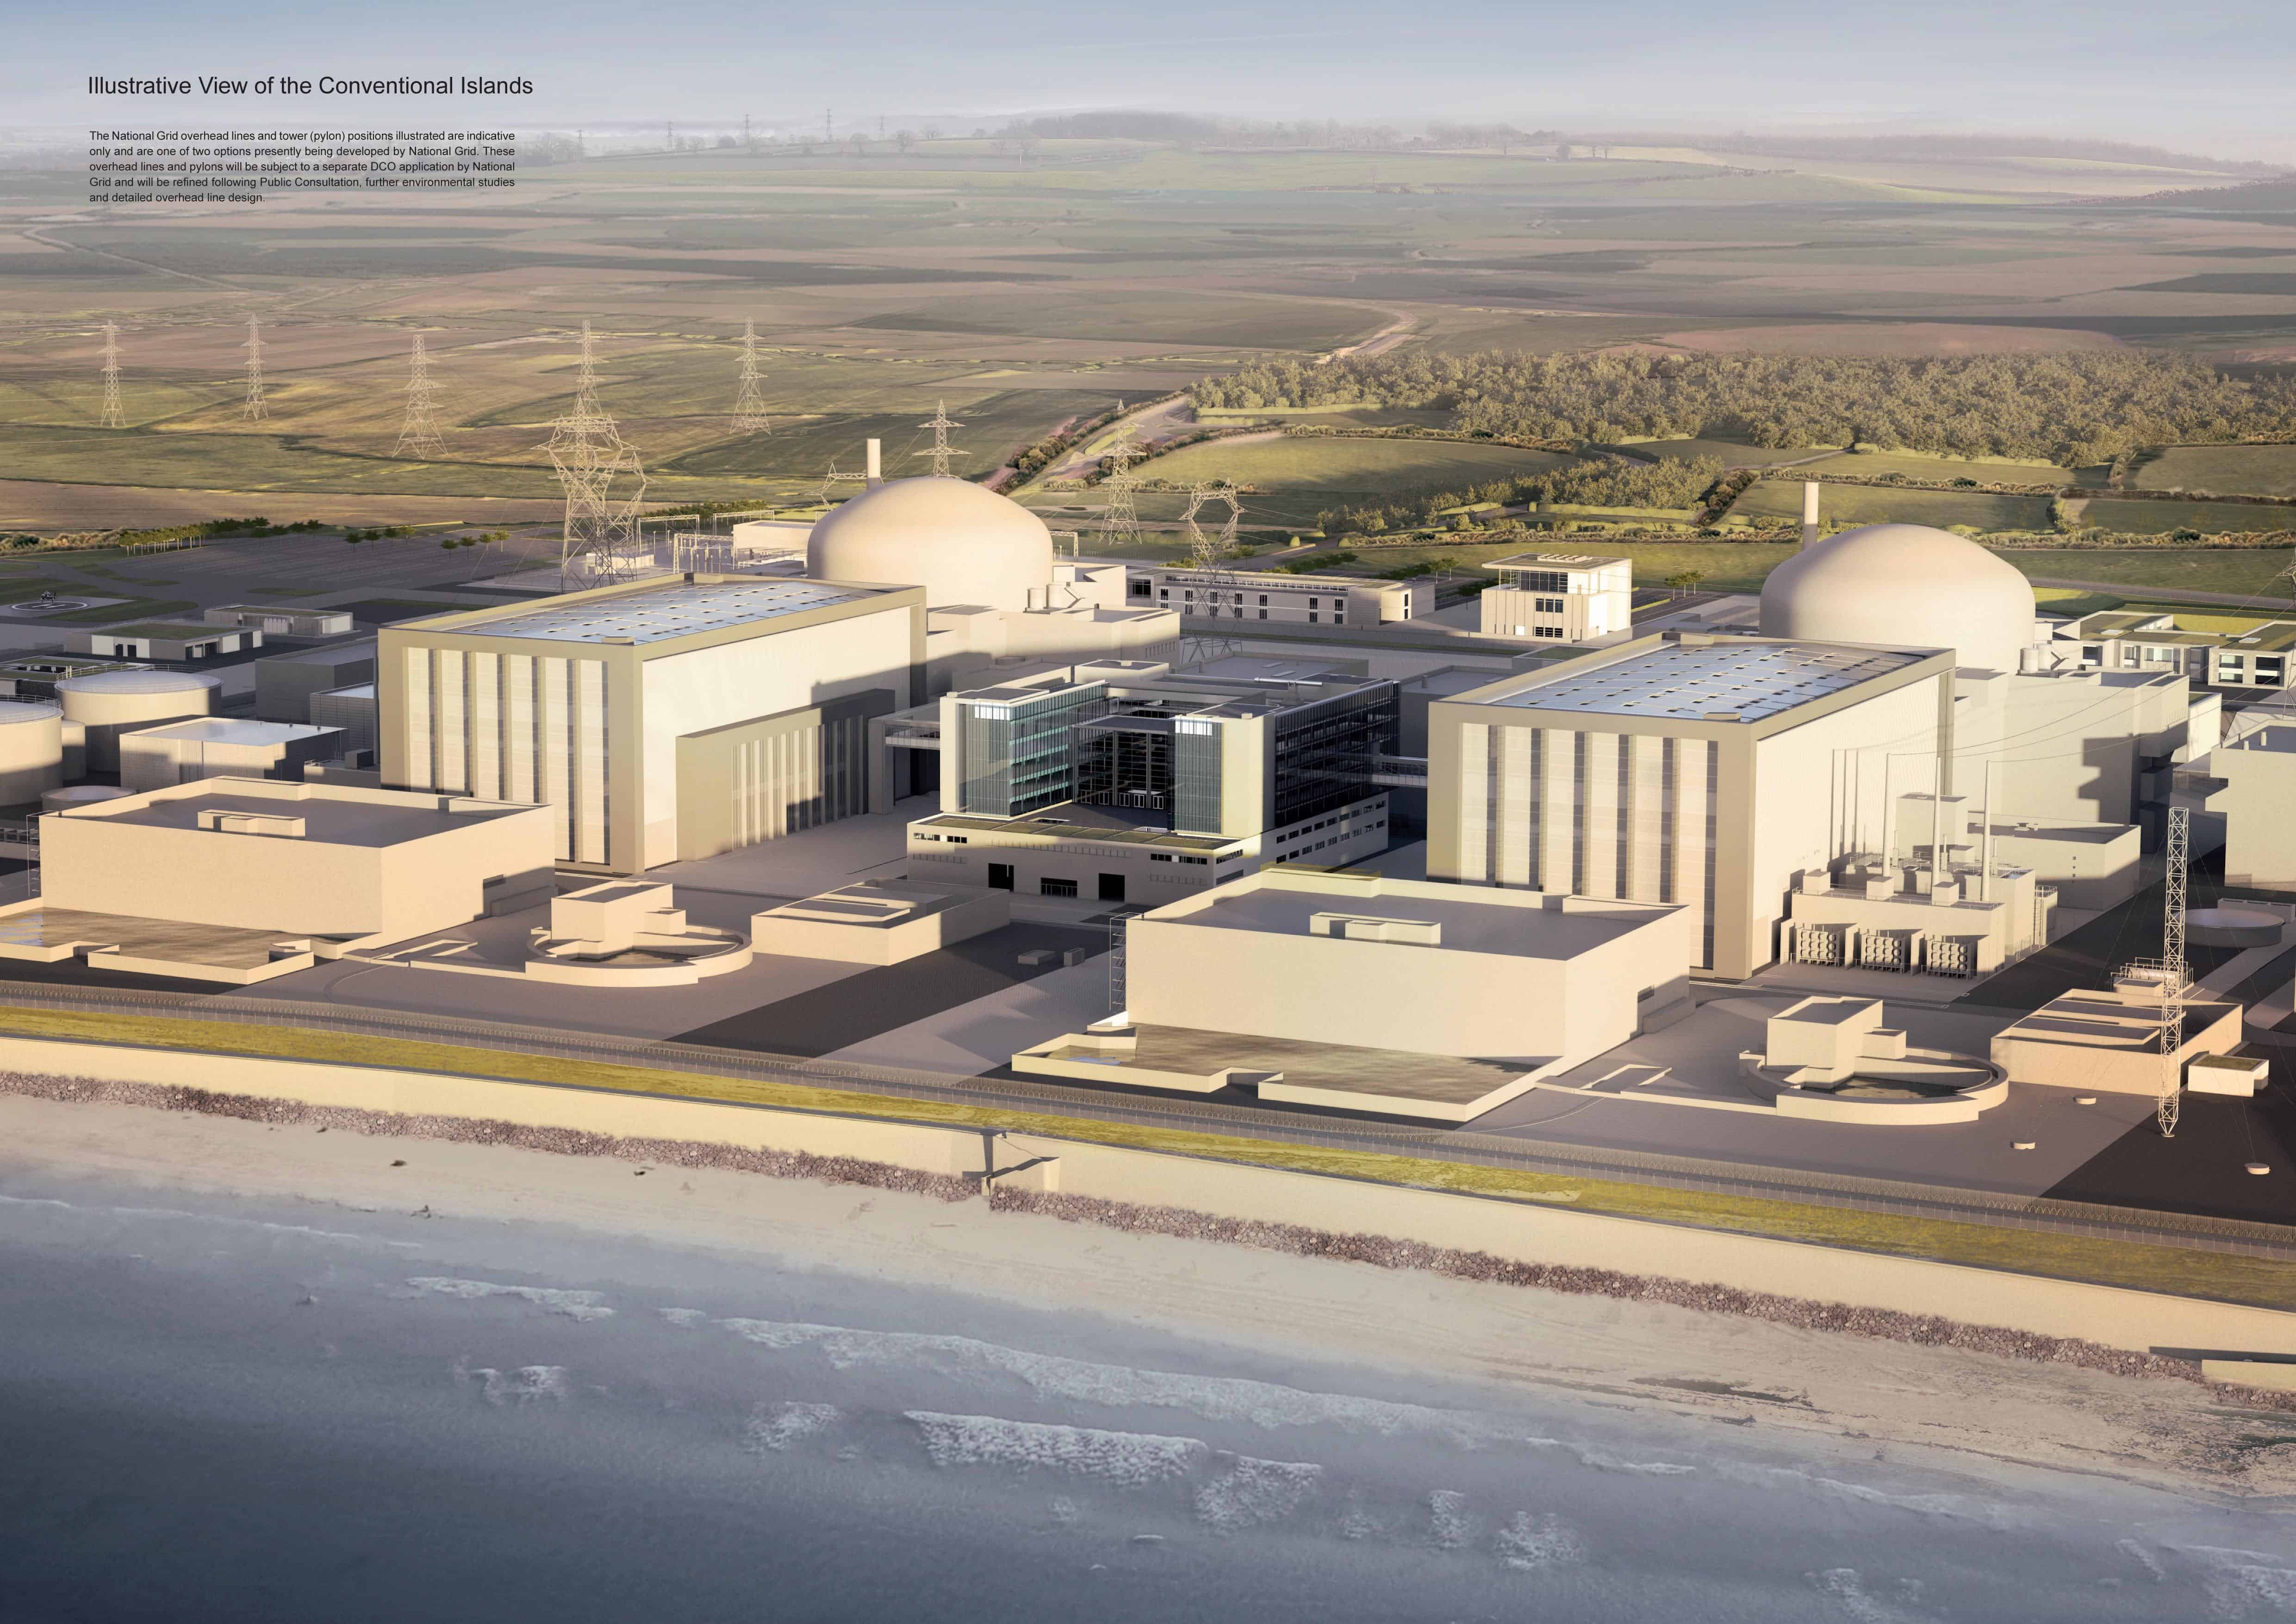 Hinkley C will generate an estimated 25,000 jobs